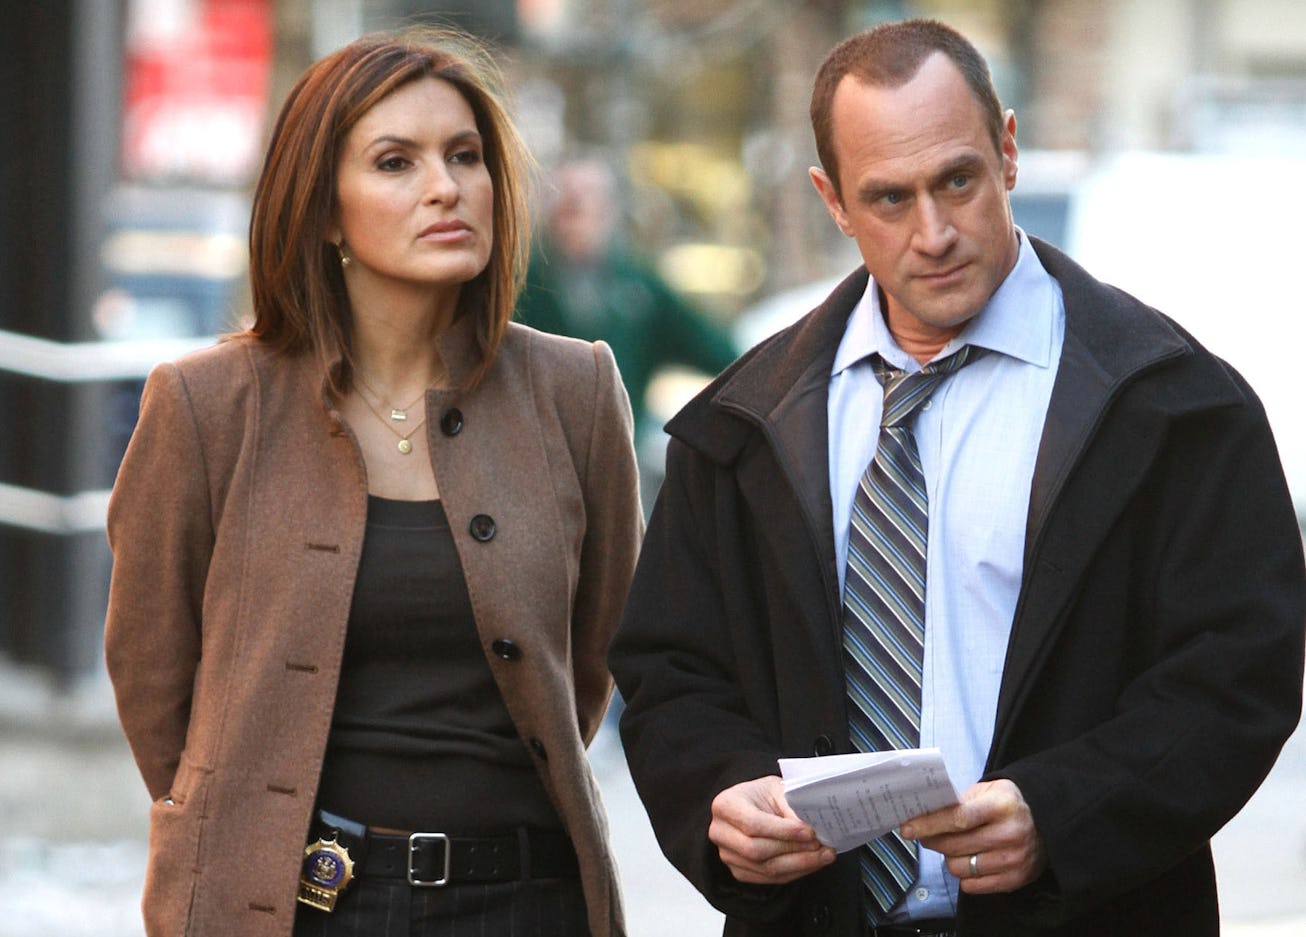 Mariska Hargitay and Chris Meloni are seen working on the set of the NBC TV Show "Law and Order SVU"...